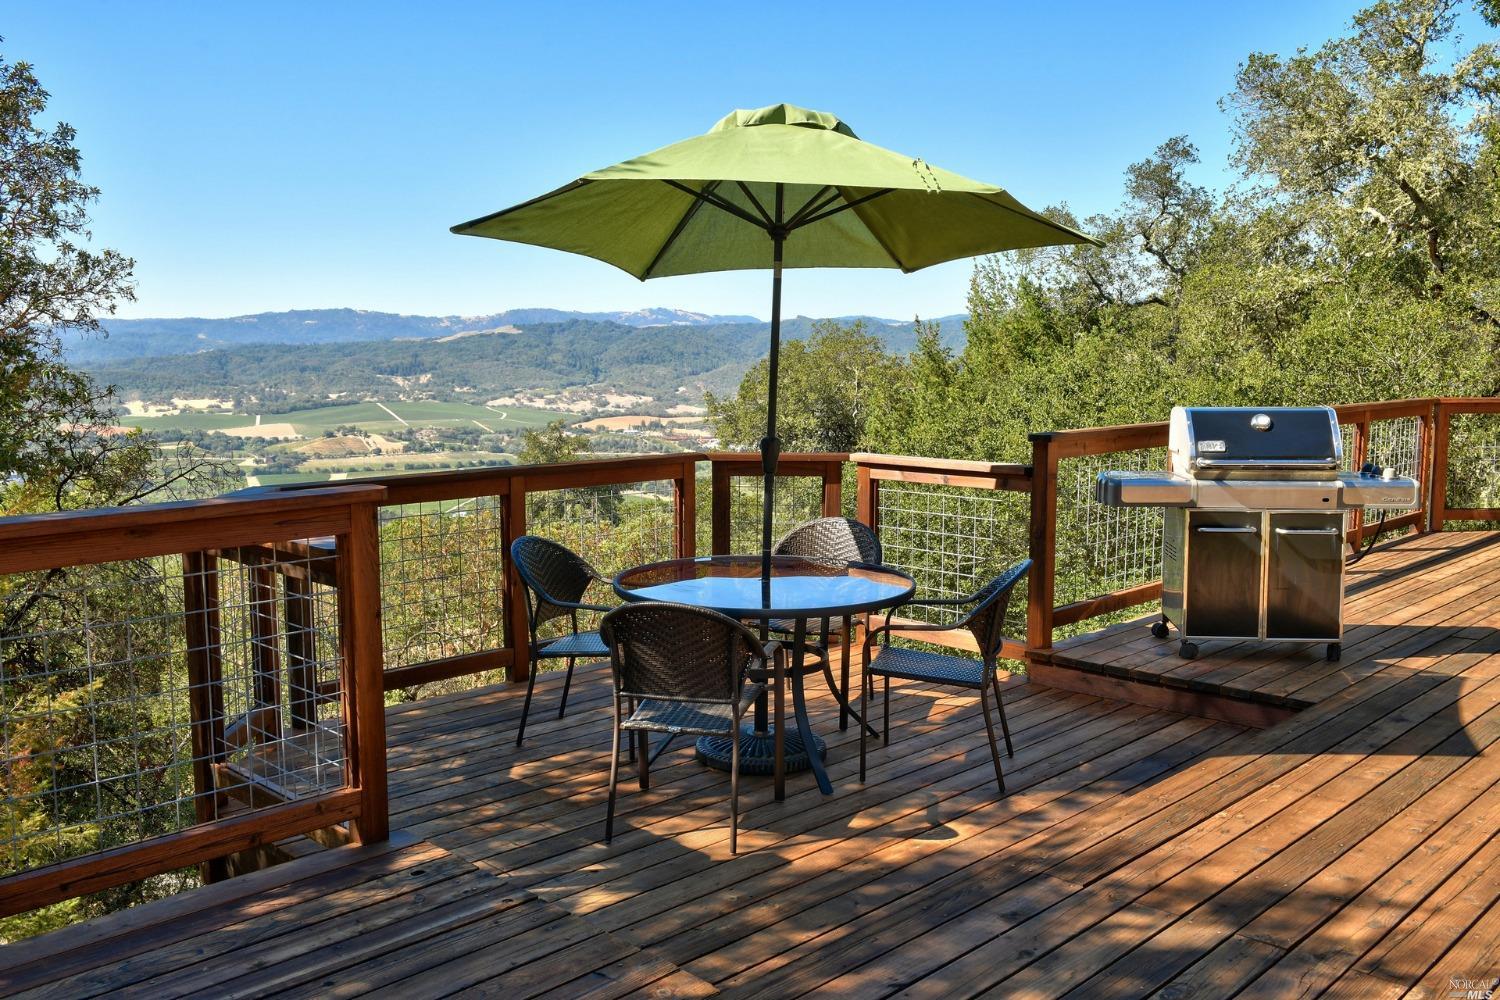 a view of a roof deck with furniture